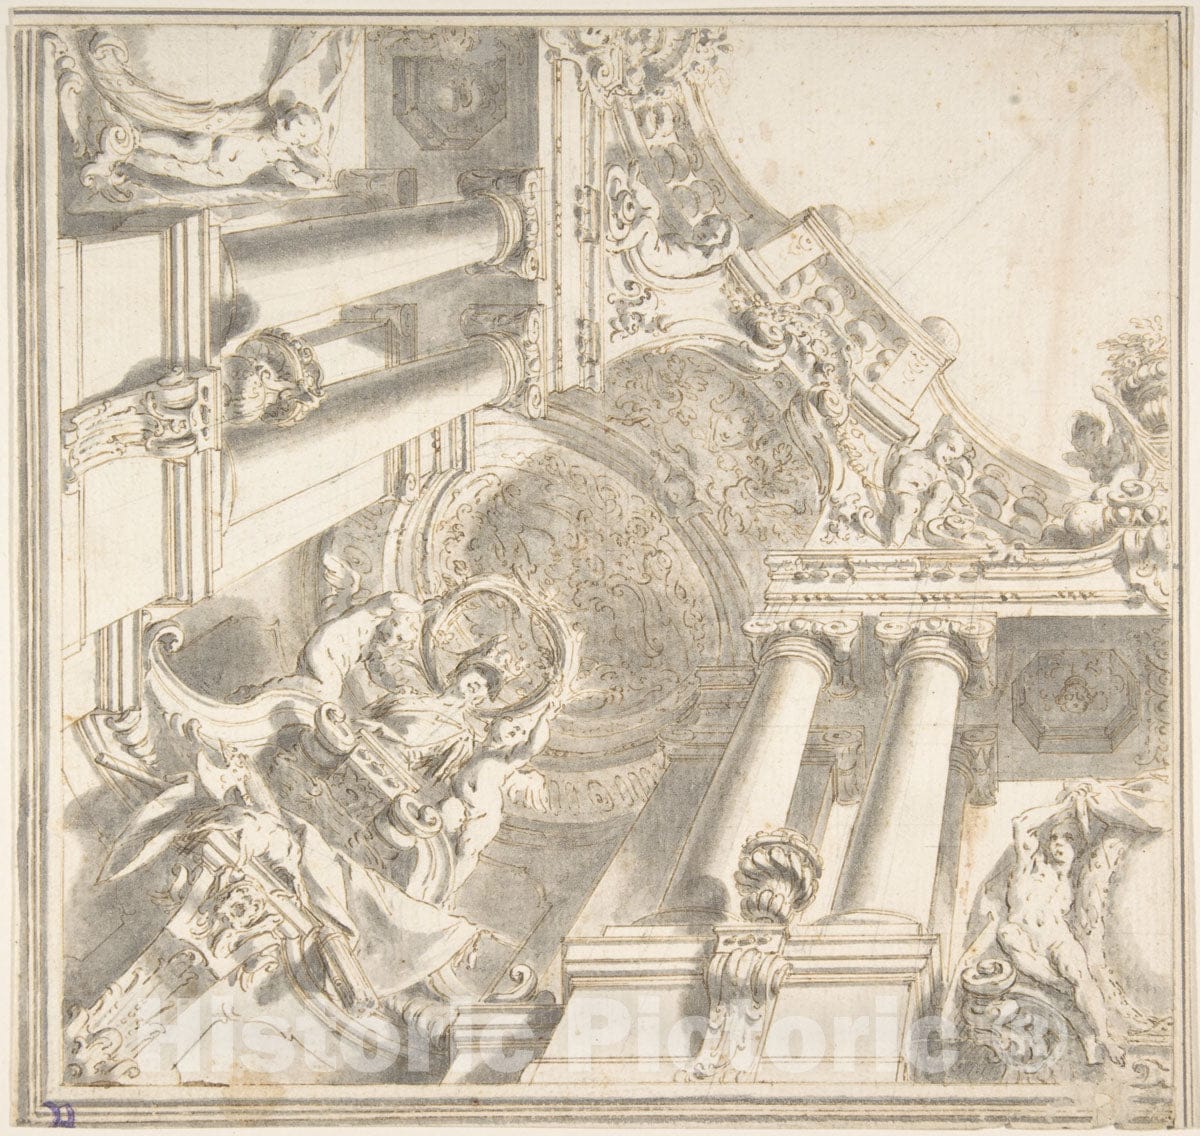 Art Print : Vittorio Maria Bigari - Design for a Quarter of a Trompe L'Oeil Ceiling with Architecture in The Ionic Order and a Statue of Victory : Vintage Wall Art